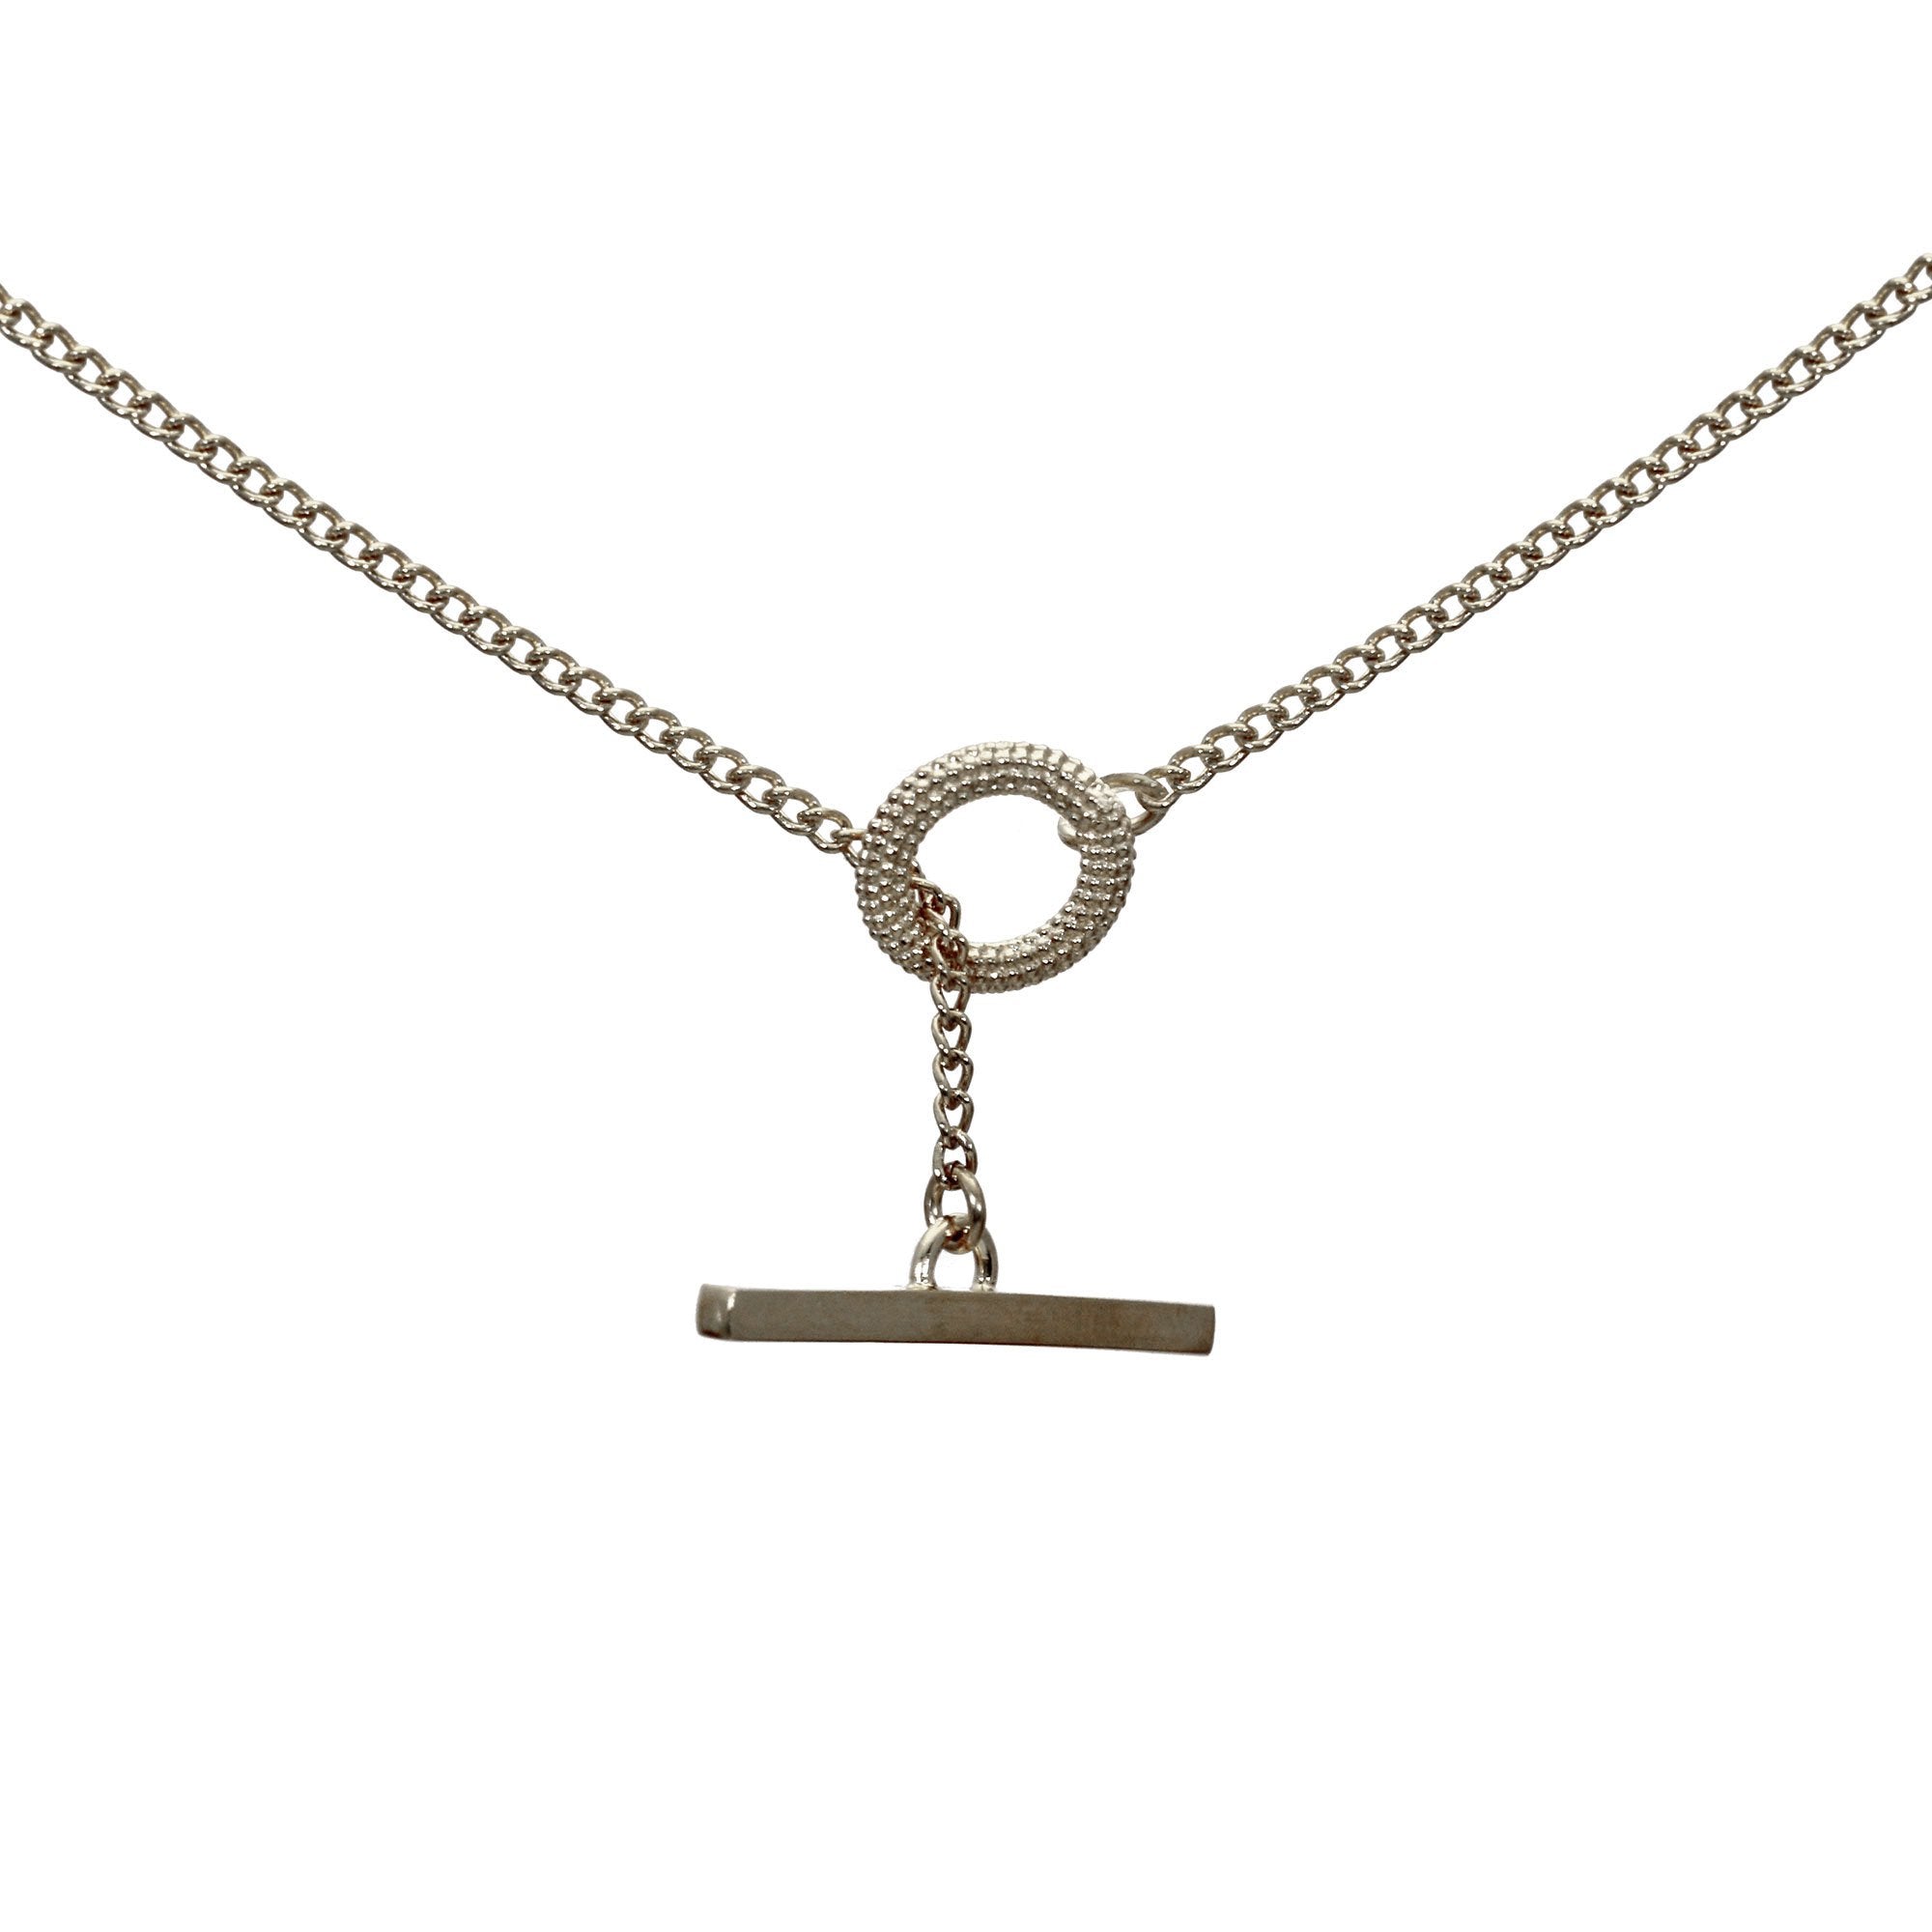 Tyro T-Bar Necklace in sterling silver